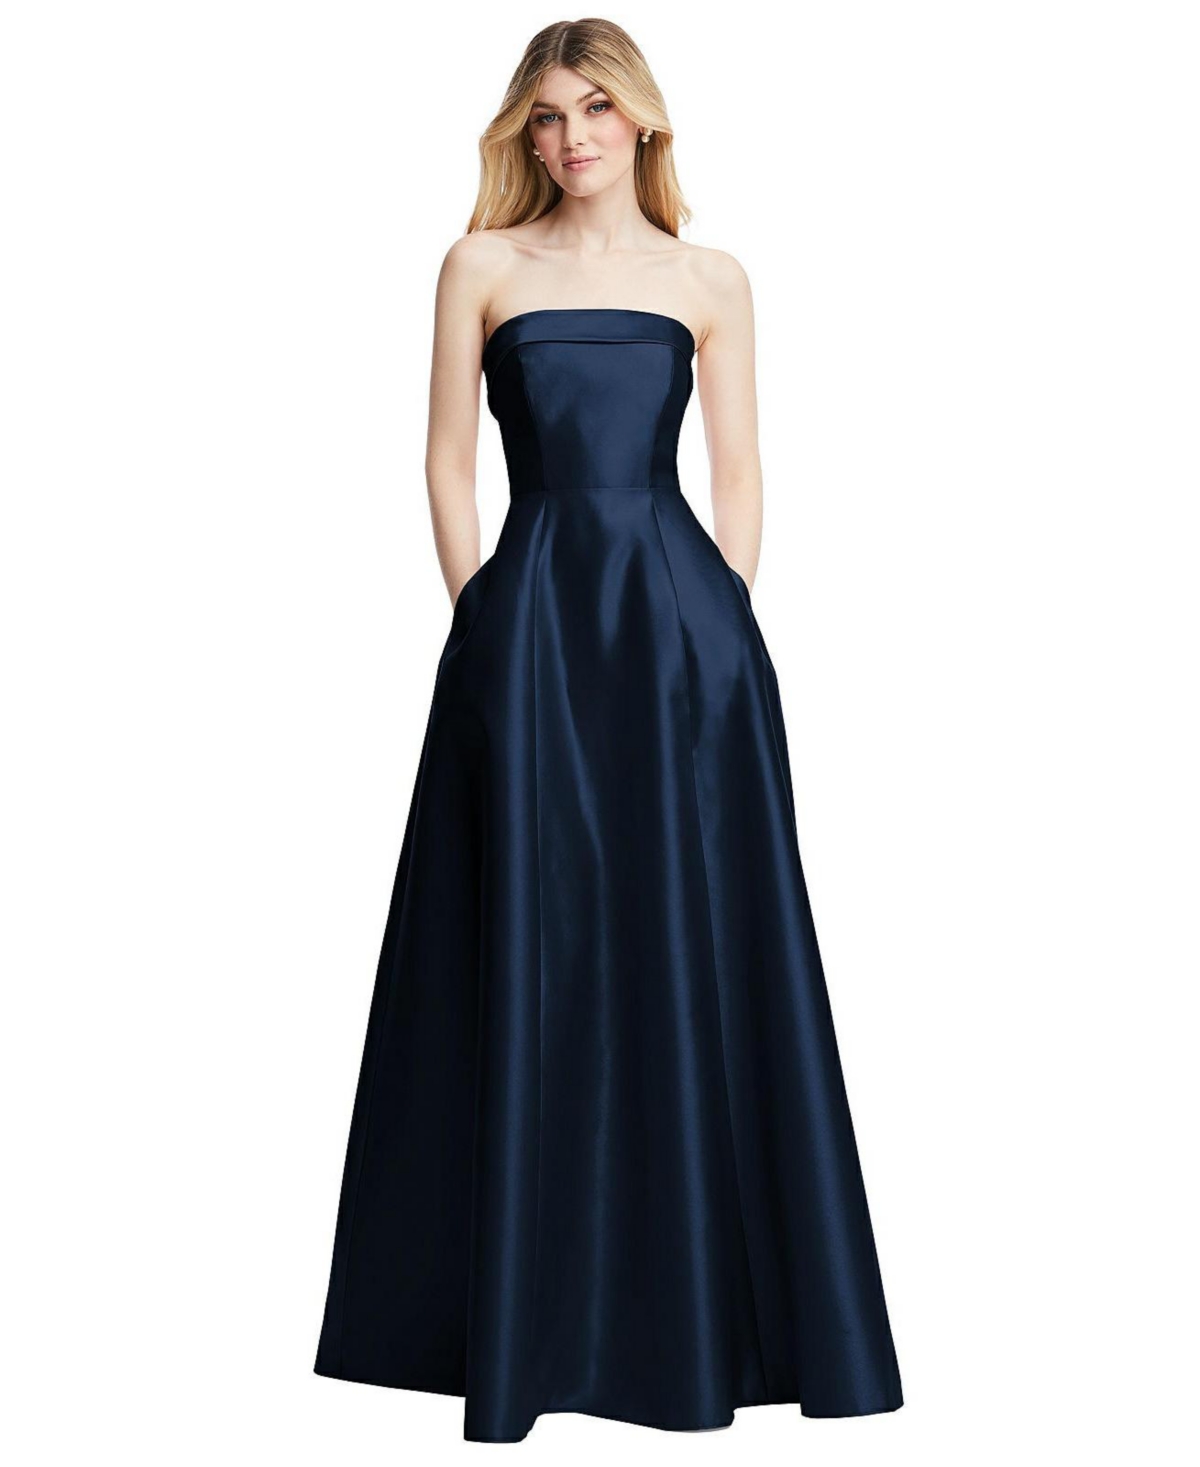 ALFRED SUNG STRAPLESS BIAS CUFF BODICE SATIN GOWN WITH POCKETS